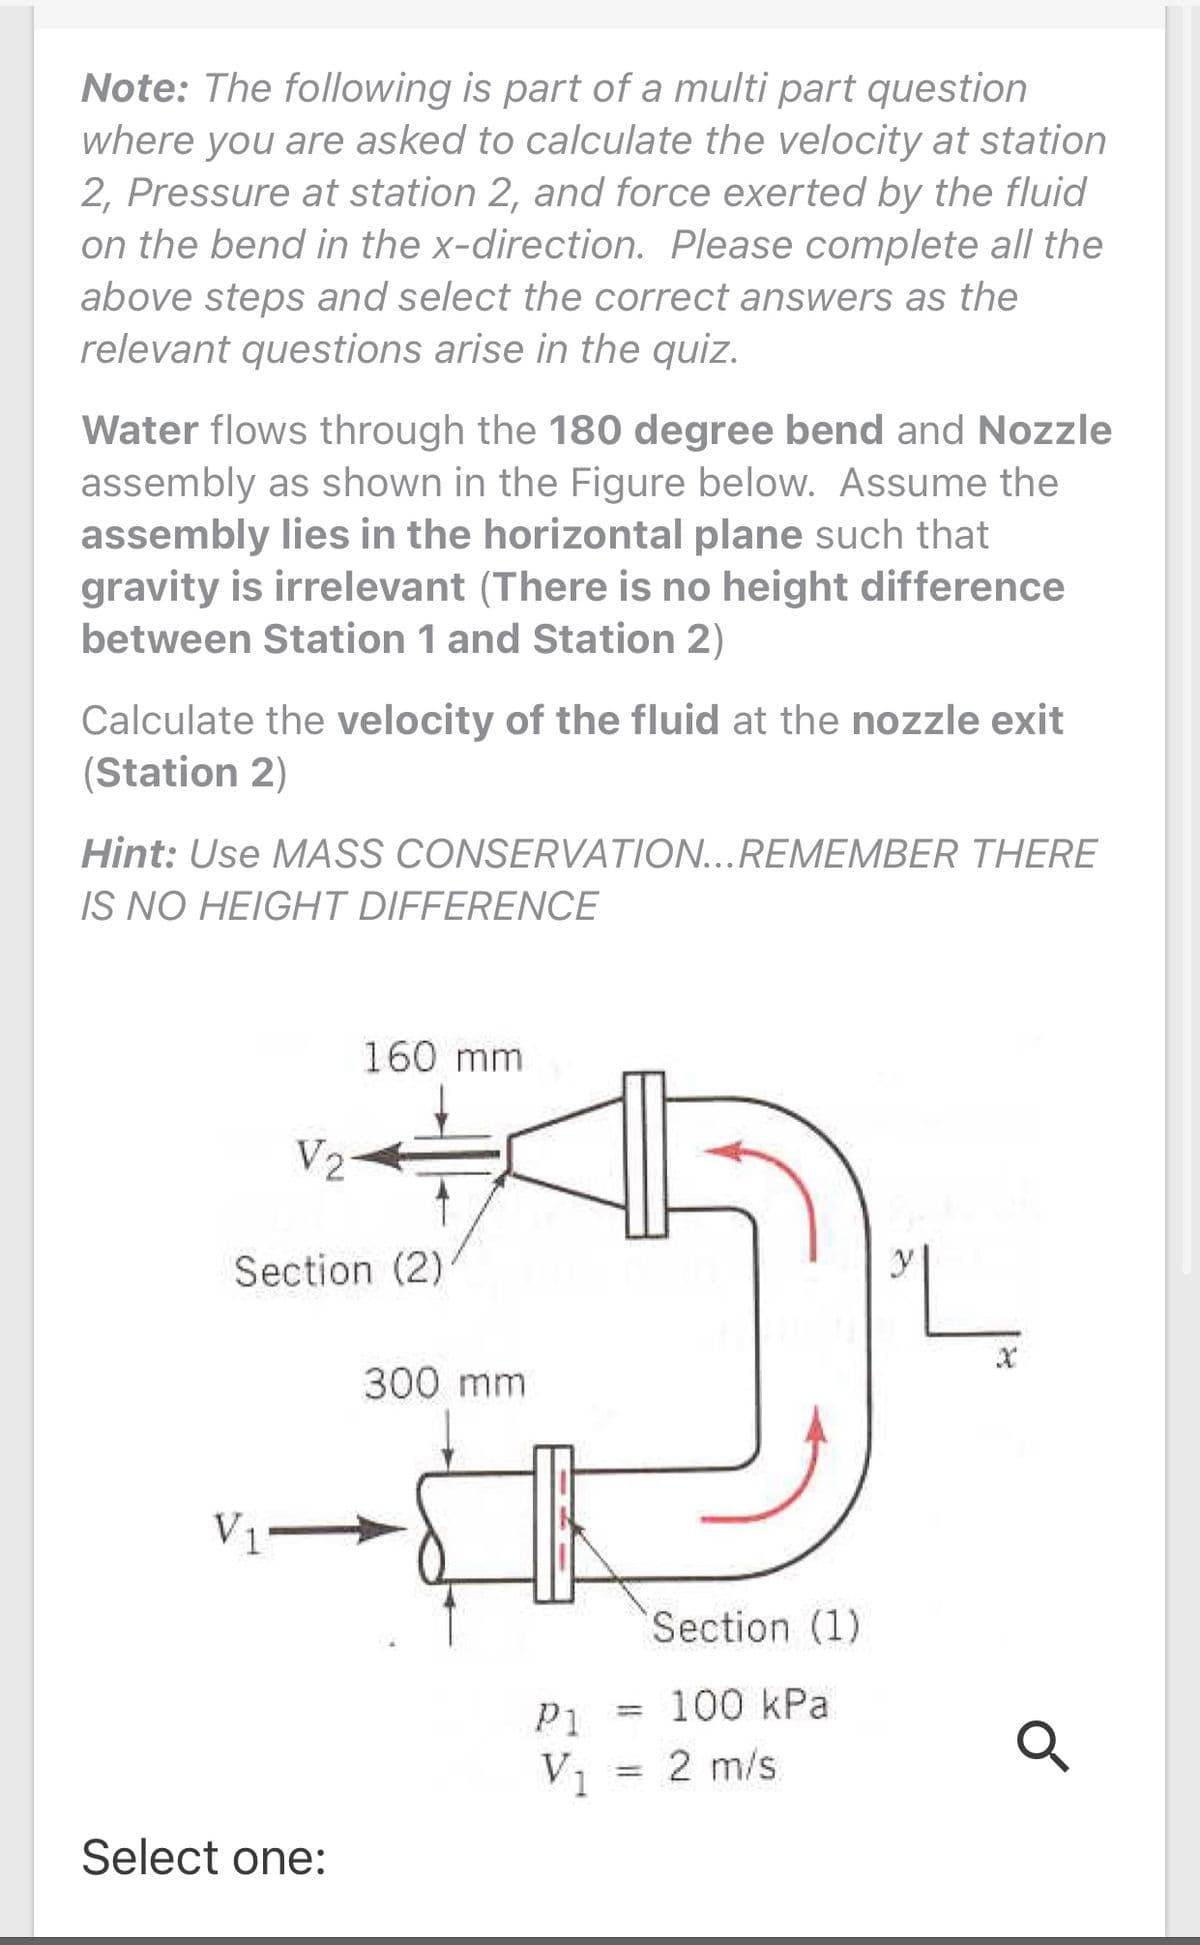 Note: The following is part of a multi part question
where you are asked to calculate the velocity at station
2, Pressure at station 2, and force exerted by the fluid
on the bend in the x-direction. Please complete all the
above steps and select the correct answers as the
relevant questions arise in the quiz.
Water flows through the 180 degree bend and Nozzle
assembly as shown in the Figure below. Assume the
assembly lies in the horizontal plane such that
gravity is irrelevant (There is no height difference
between Station 1 and Station 2)
Calculate the velocity of the fluid at the nozzle exit
(Station 2)
Hint: Use MASS CONSERVATION...REMEMBER THERE
IS NO HEIGHT DIFFERENCE
160 mm
V2
Section (2)
300 mm
V1
Section (1)
P1 = 100 kPa
%3D
V1
= 2 m/s
%3D
Select one:
